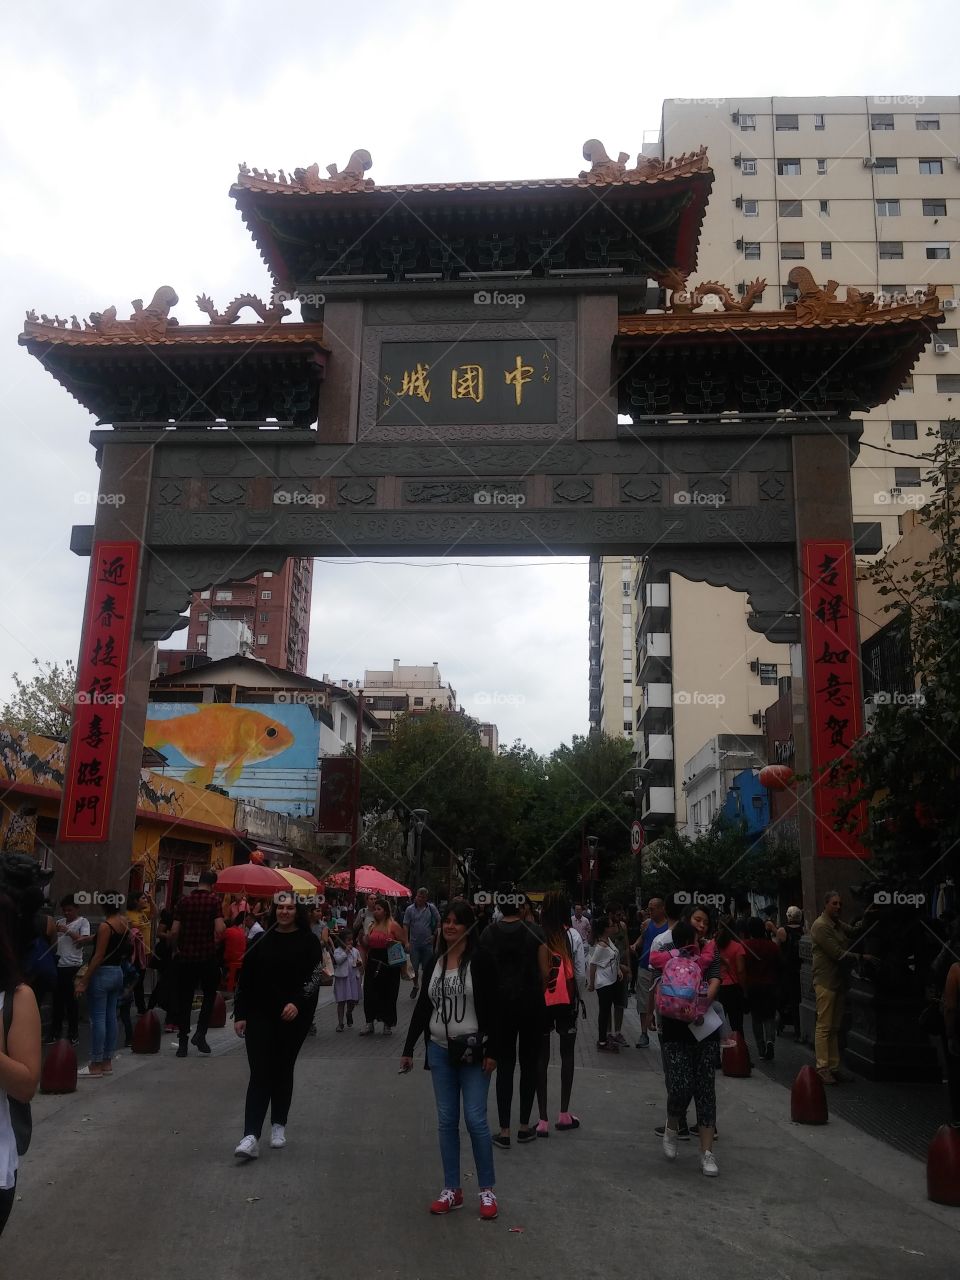 Entrance to the Chinatown